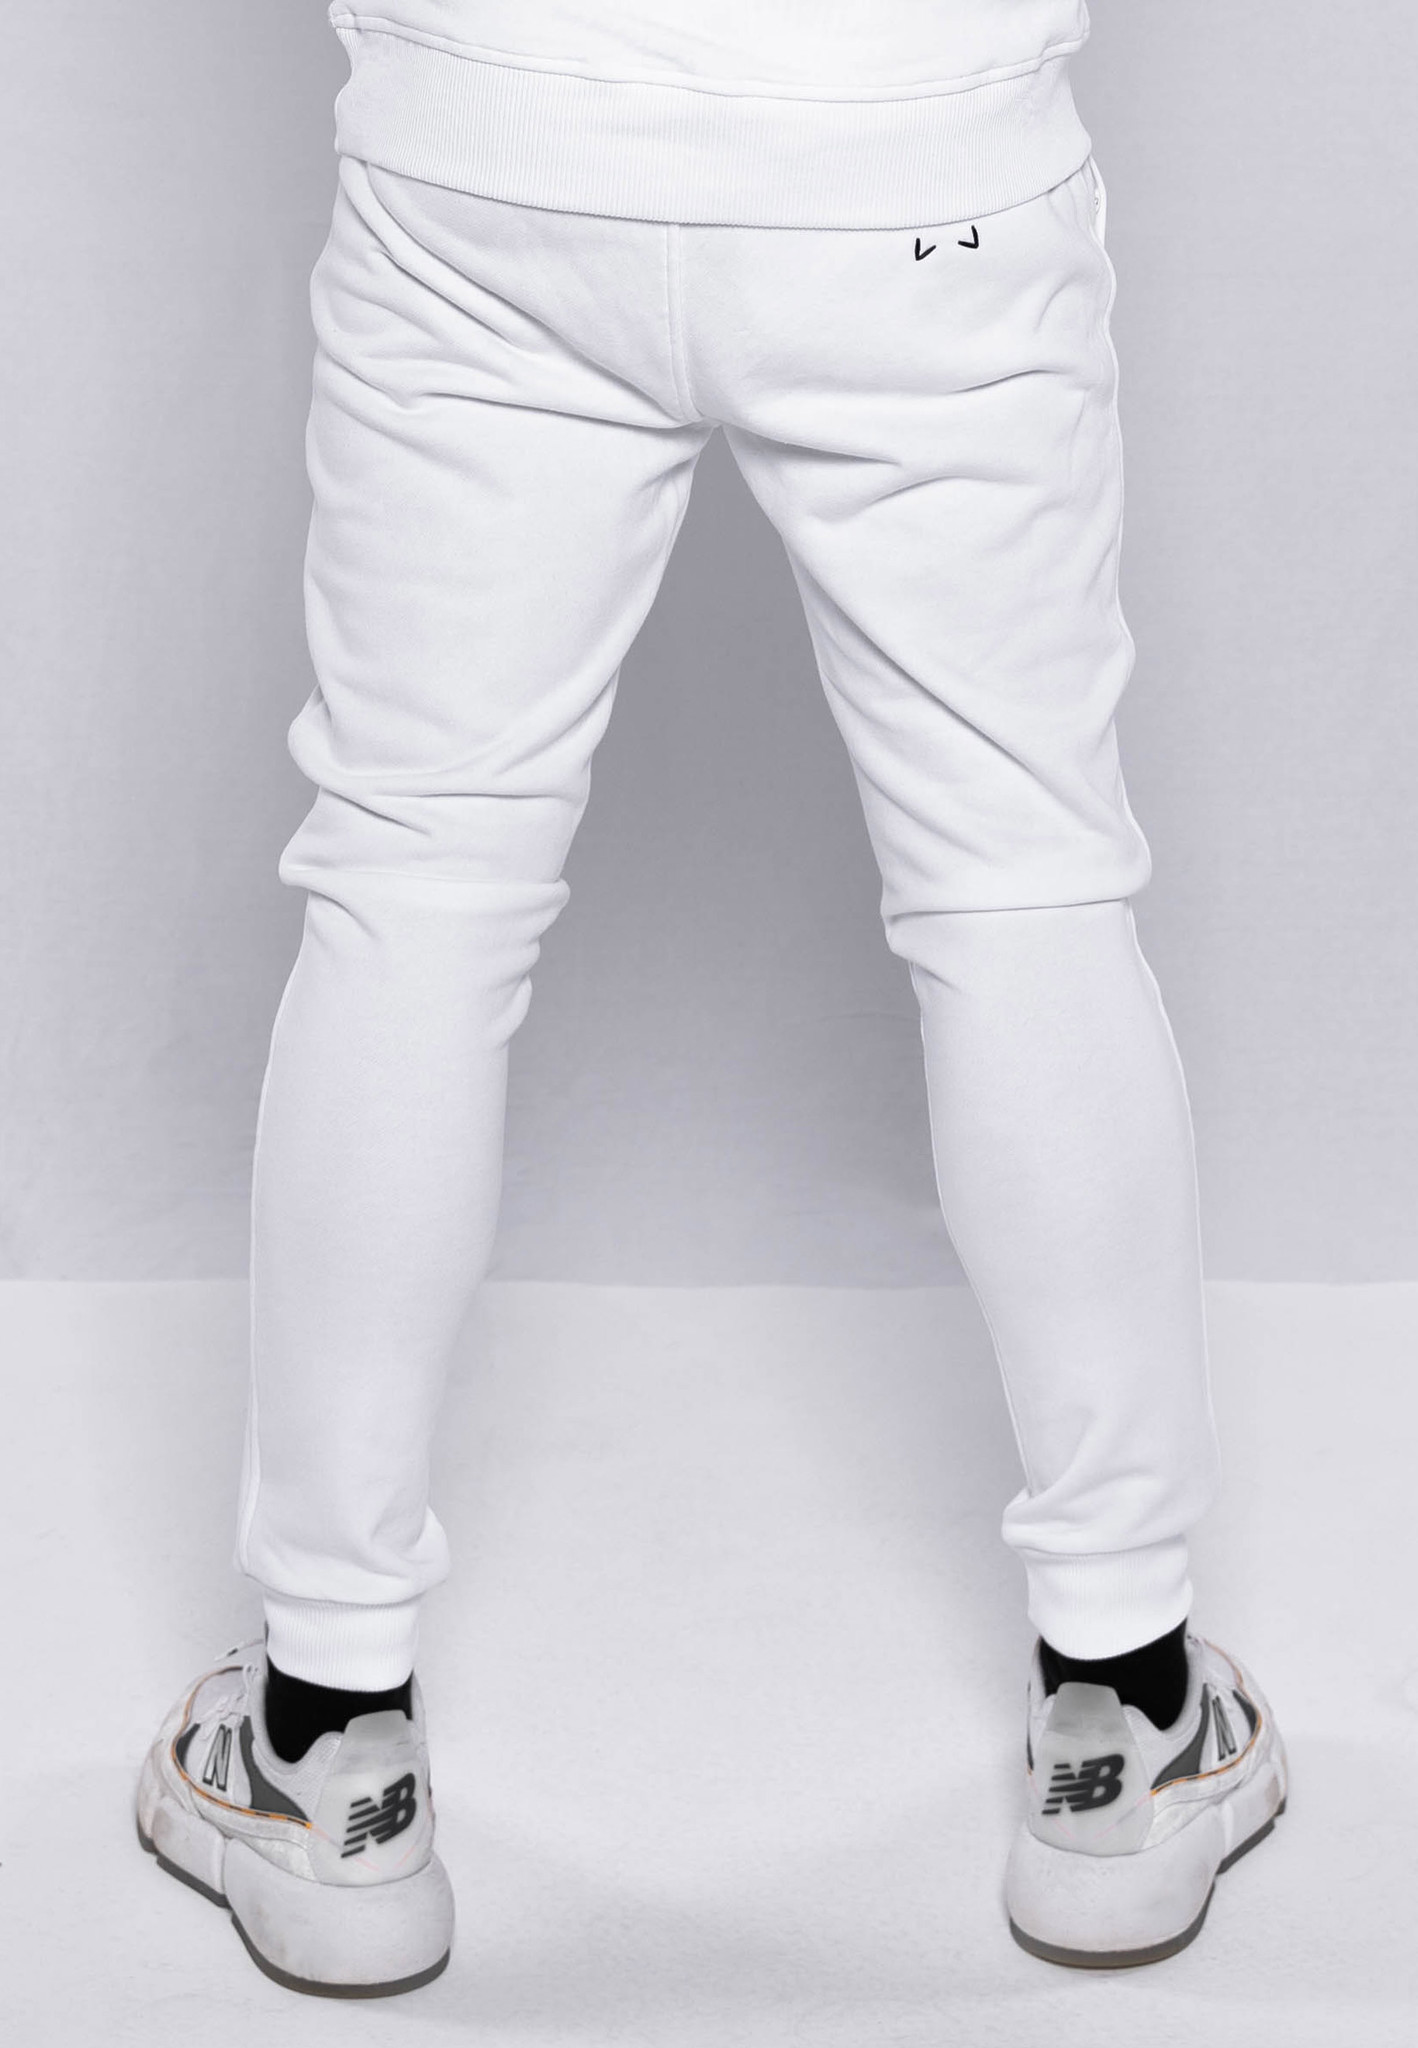 Conflict Sweat Pants Essentials White - Order now online. 